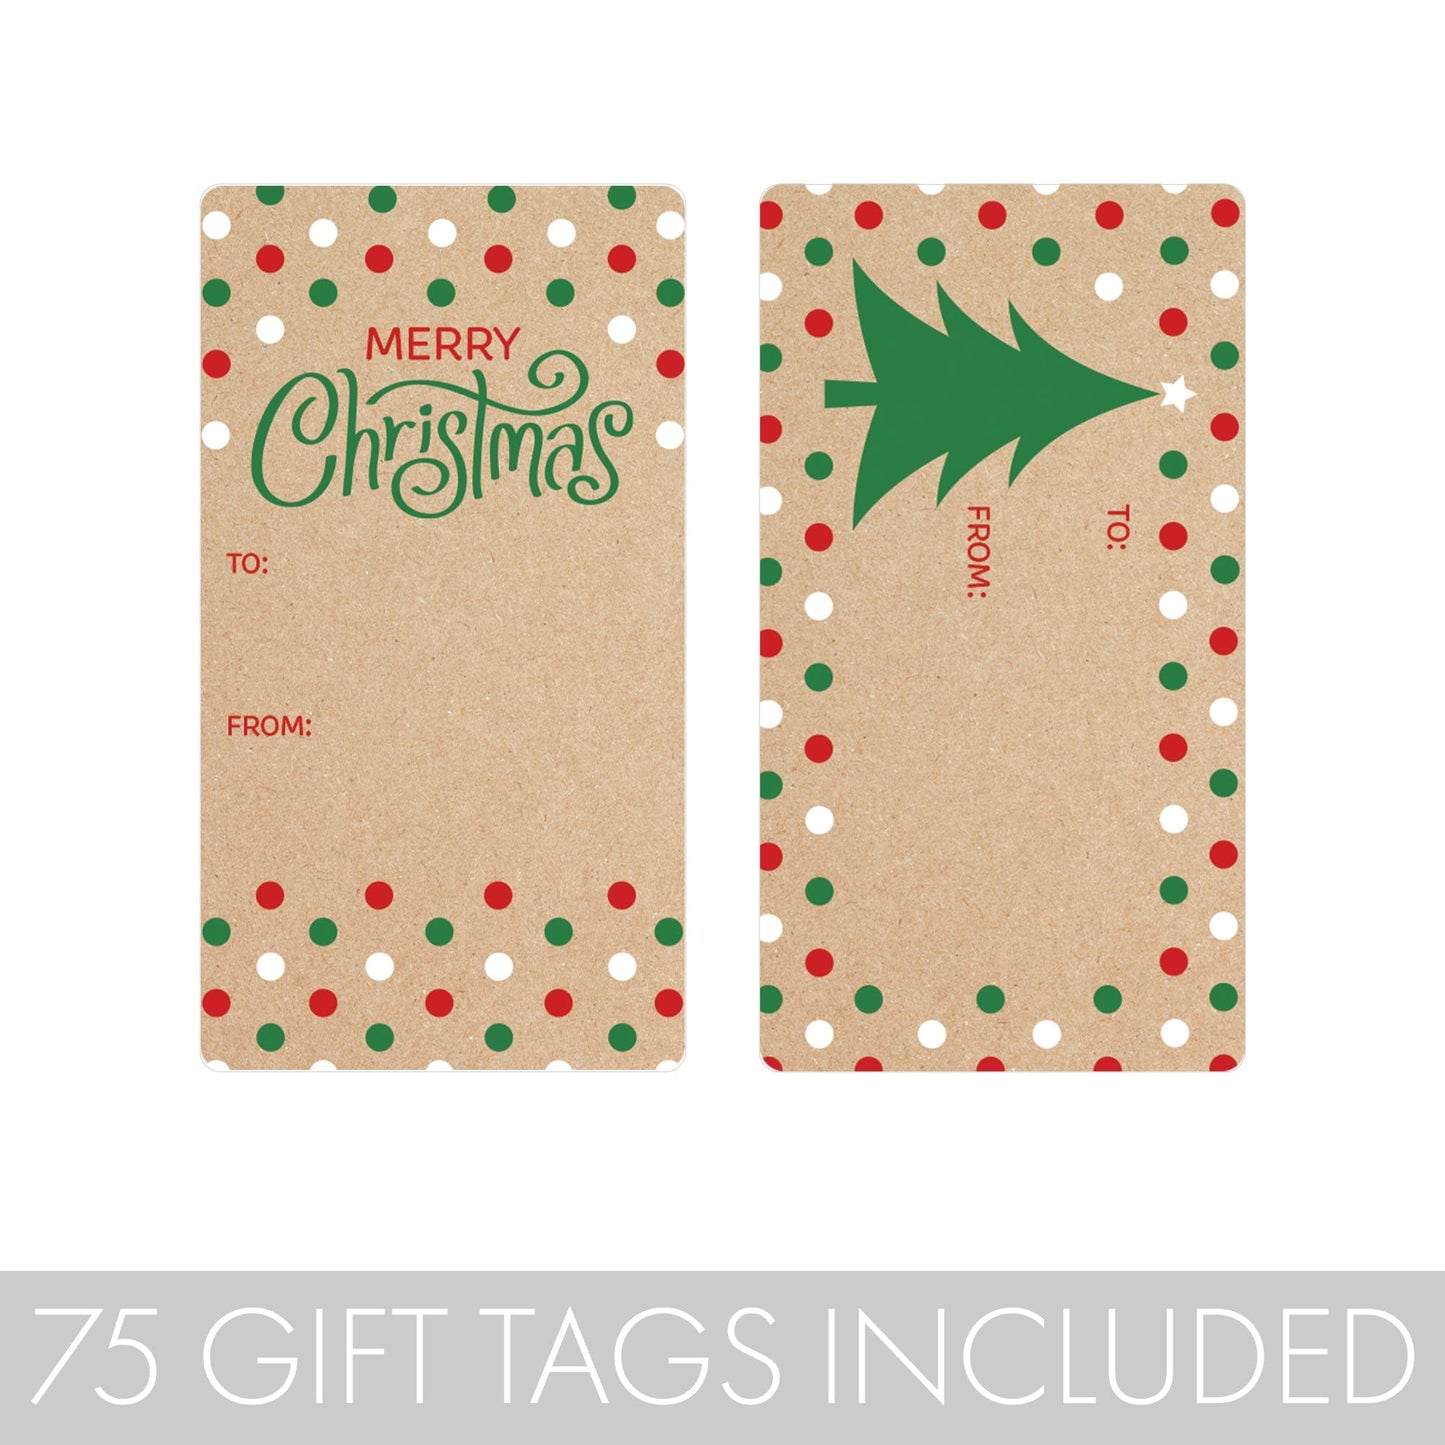 Kraft Christmas Gift Tag Stickers - Red and Green Polka Dots - 75 Count